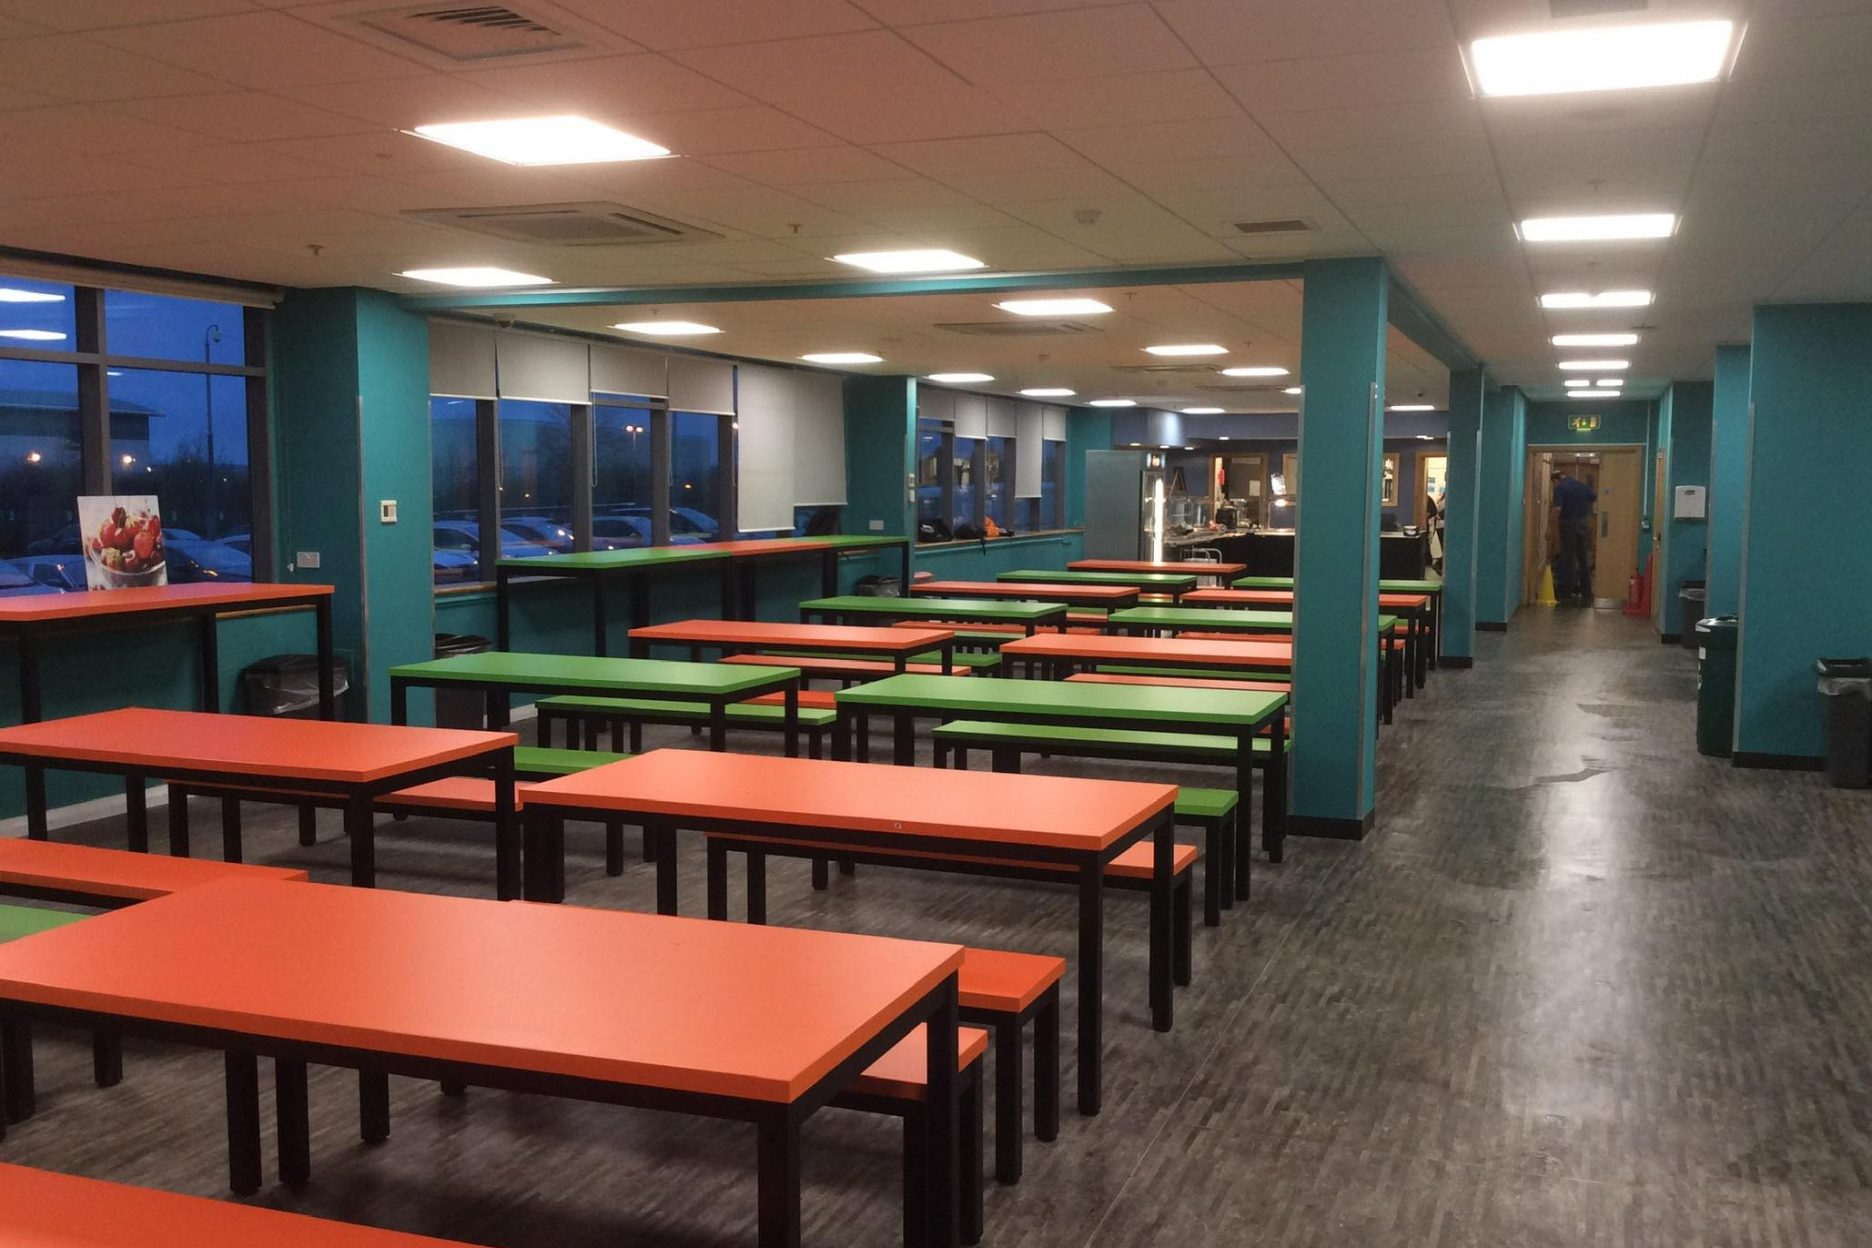 Main Canteen seating area